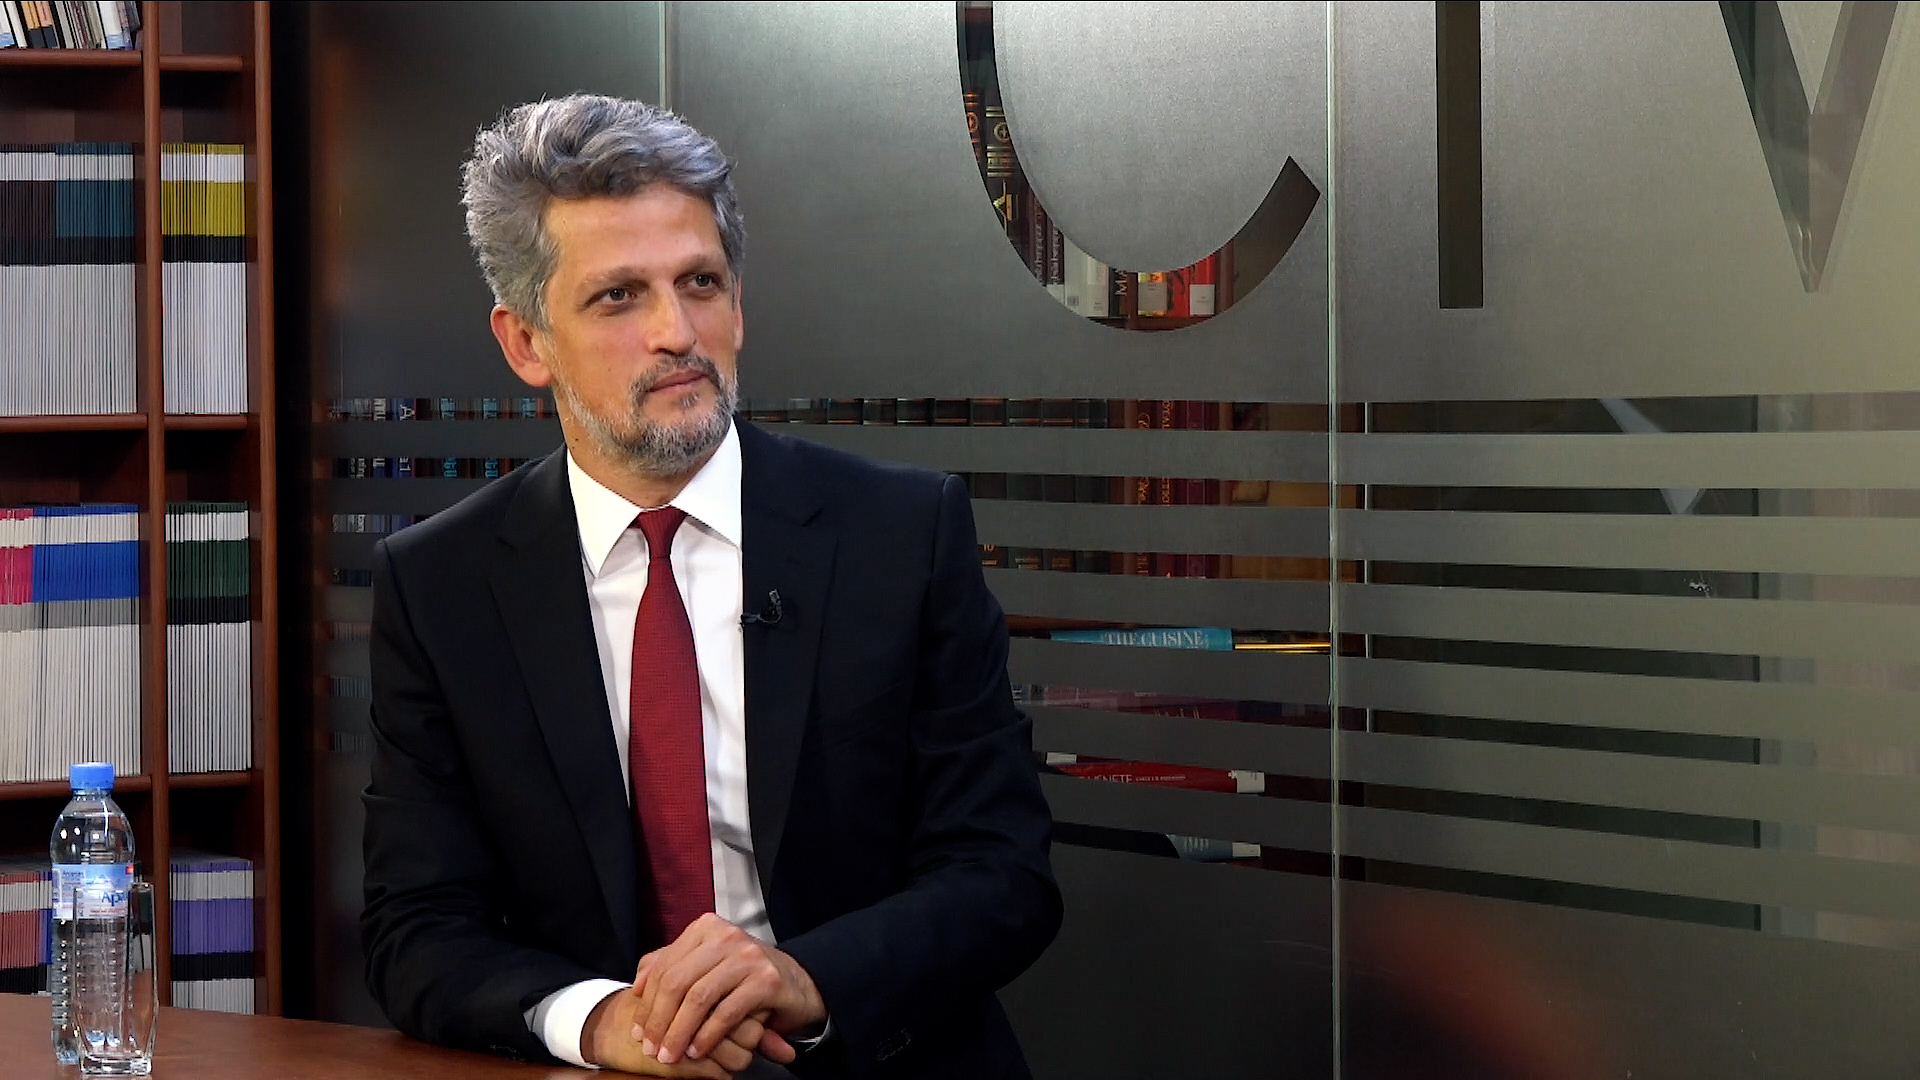 “Peace is a necessity for Armenia, not for its neighbors” – A talk with Garo Paylan